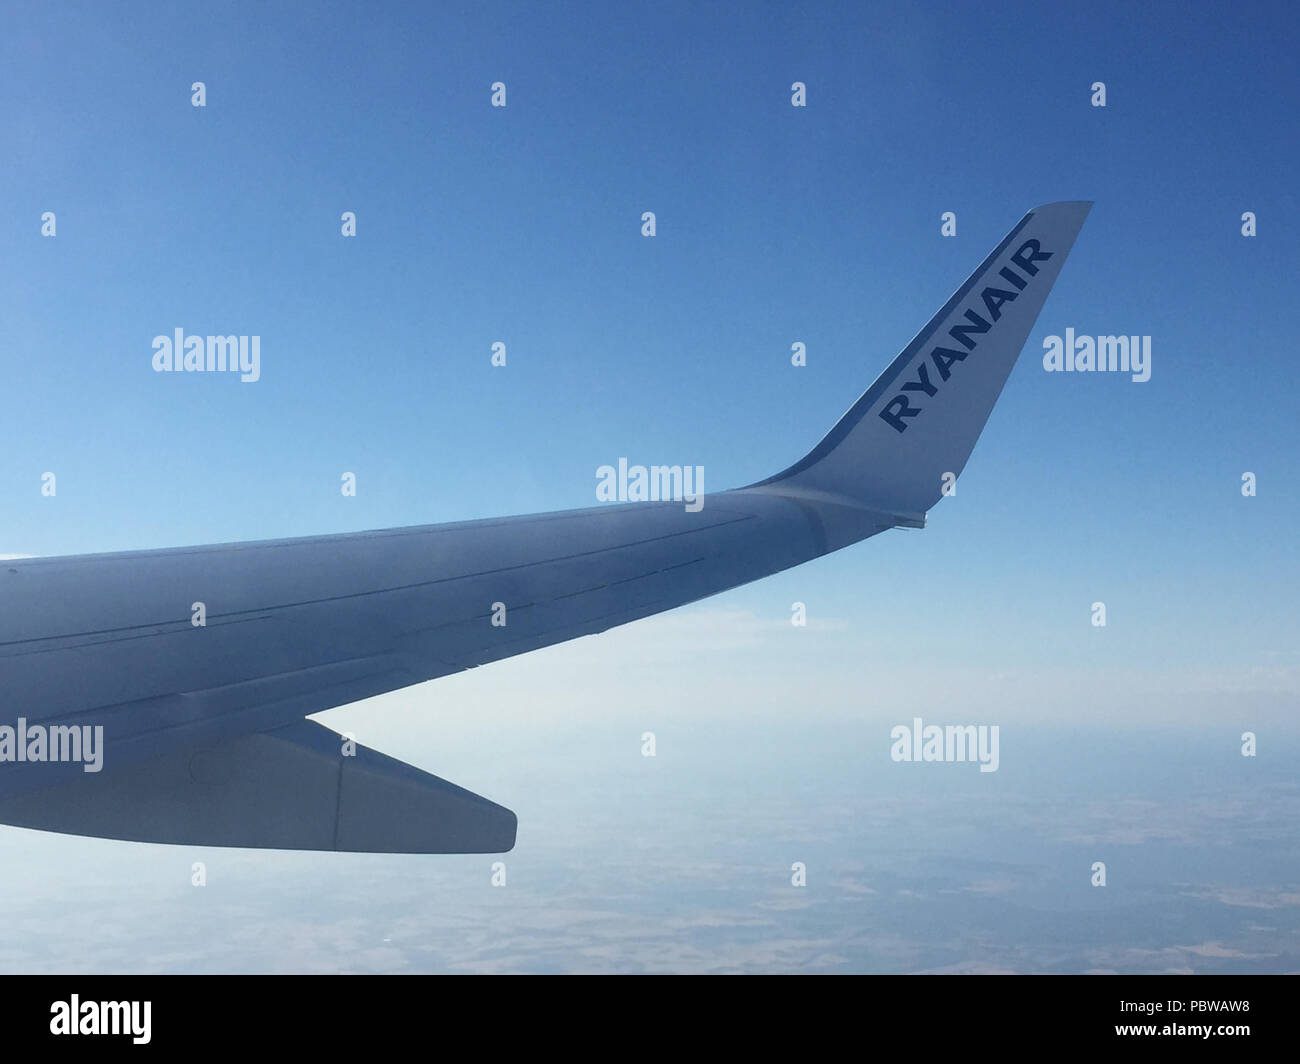 Founded In 1984 High Resolution Stock Photography and Images - Alamy